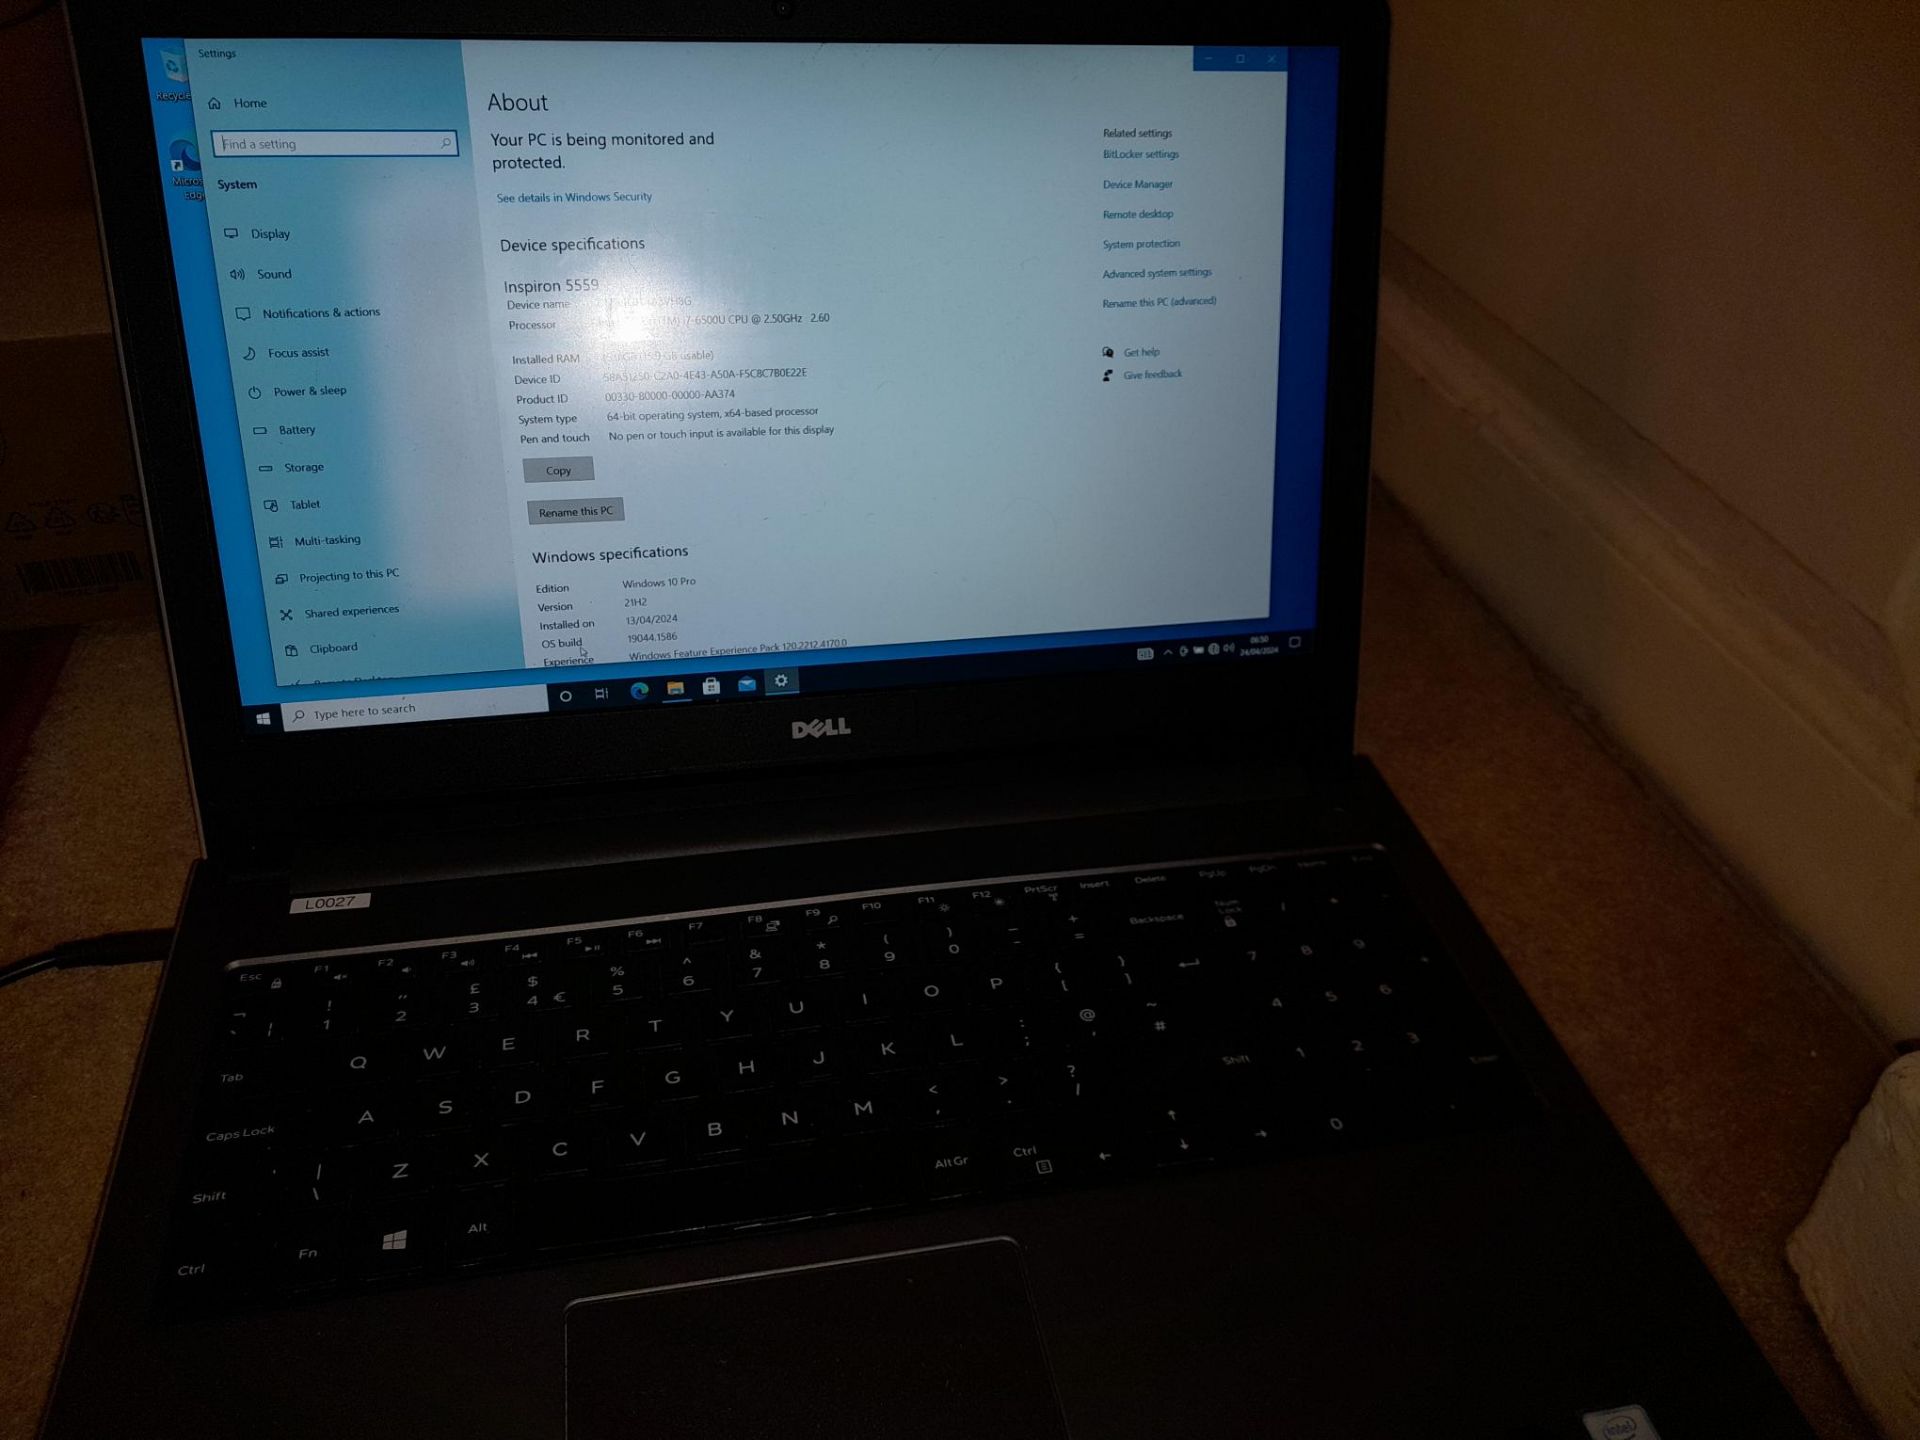 Dell Insprion 5559 Intel Core i7-6500, 16GB RAM, ST2000LM003 2 TB HDD, Windows 10 Pro, with - Bild 3 aus 10